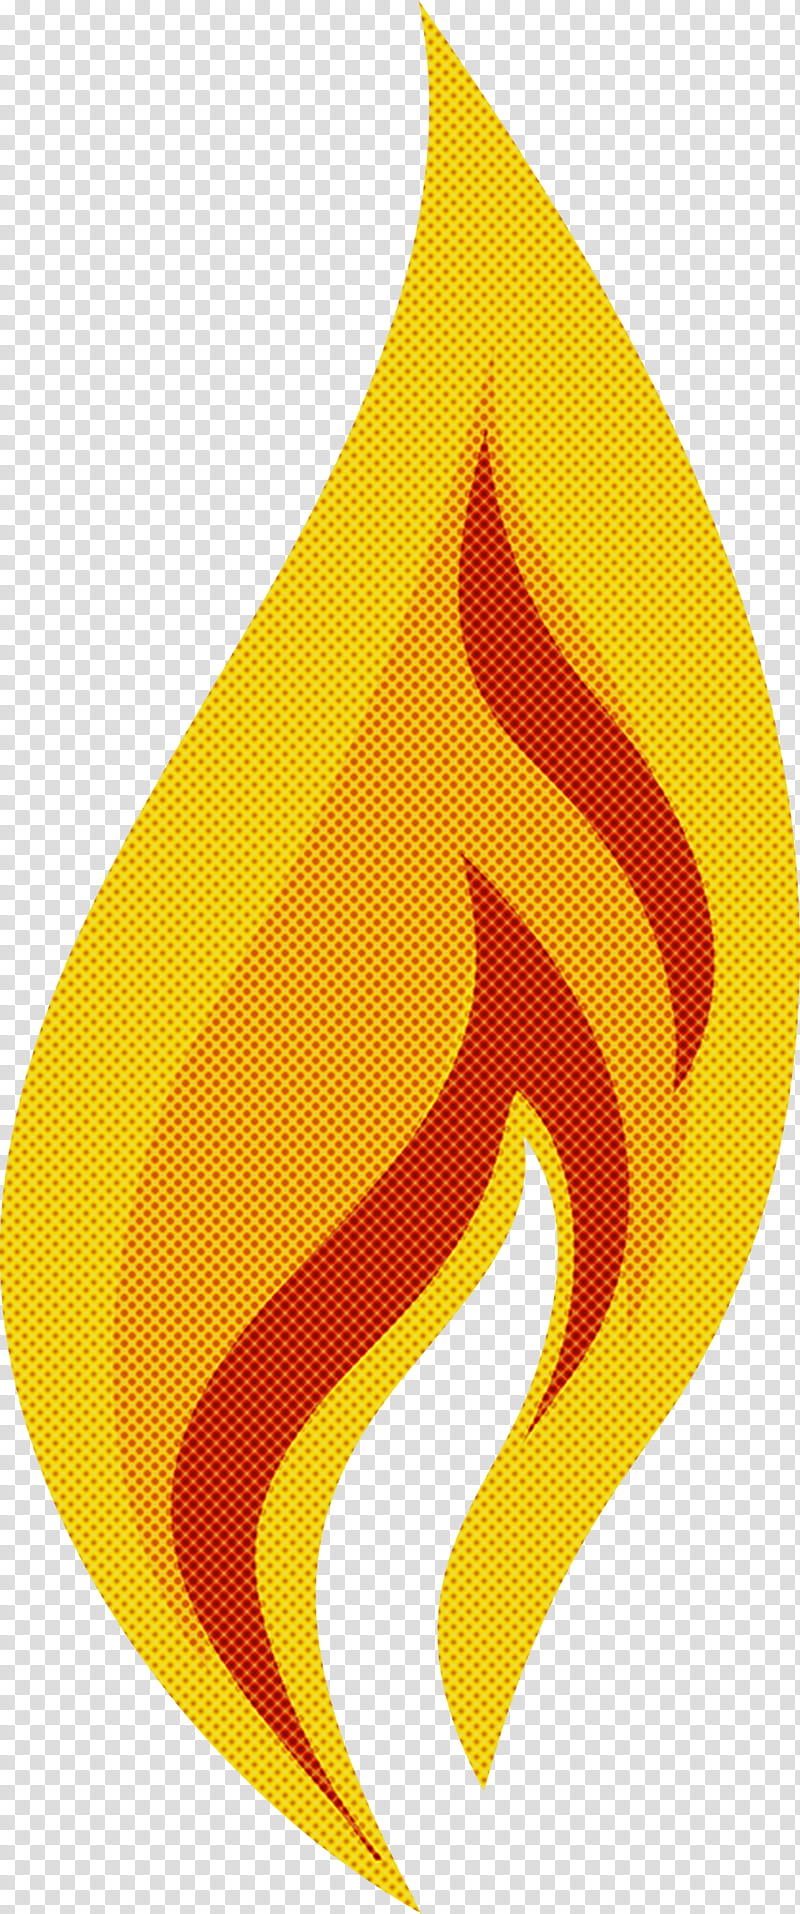 flame fire, Combustion, Text, Explosion, Sticker transparent background PNG clipart